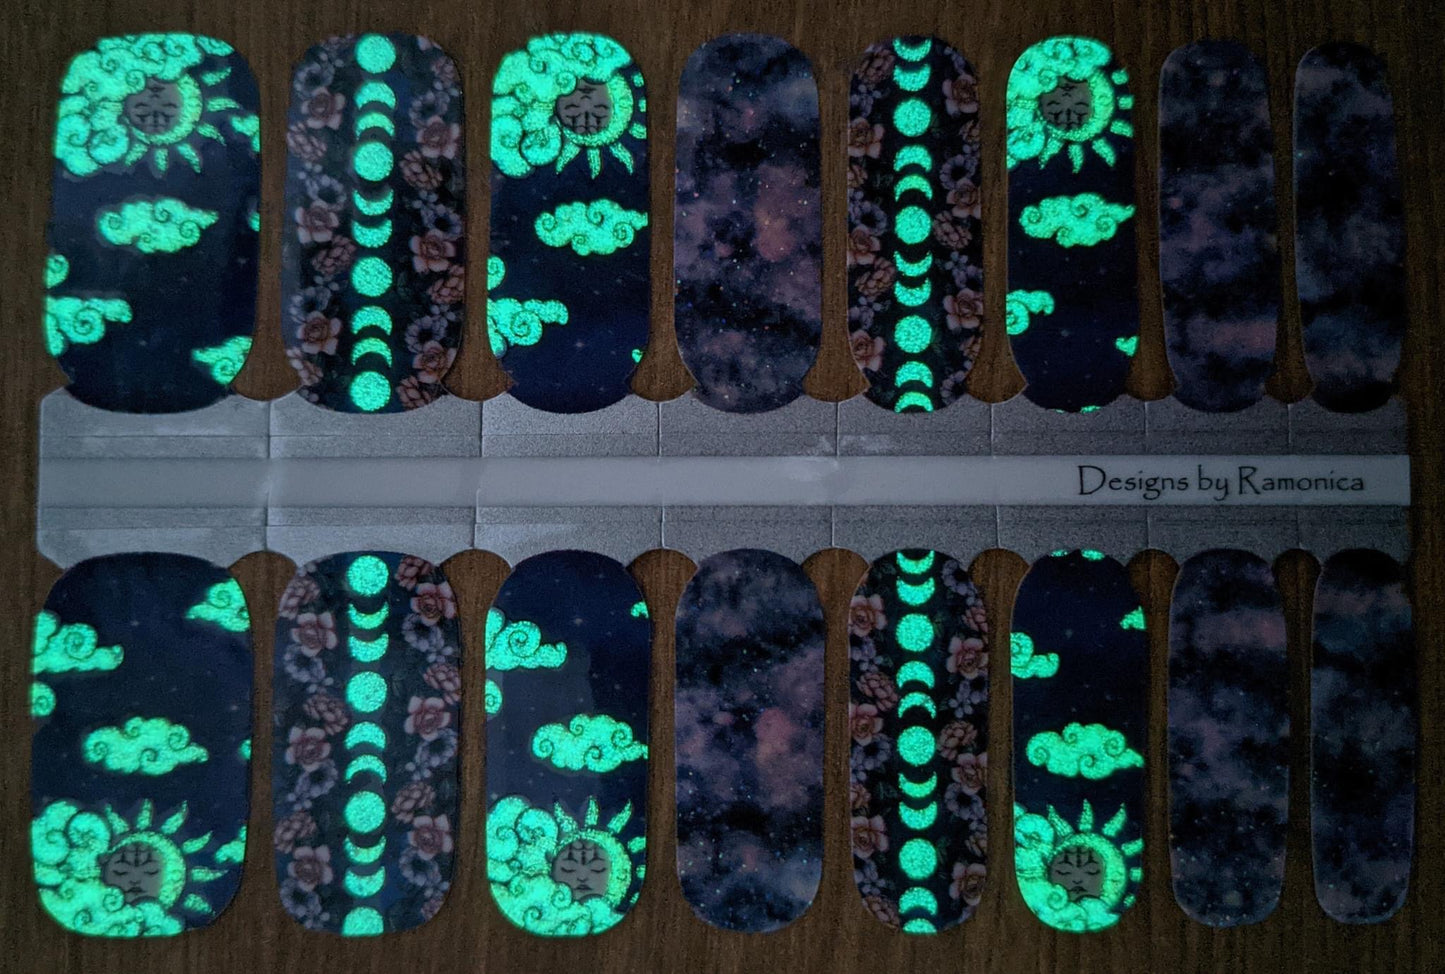 Serene Dreams (Glow In The Dark) - Limited Edition - Designs By Ramonica